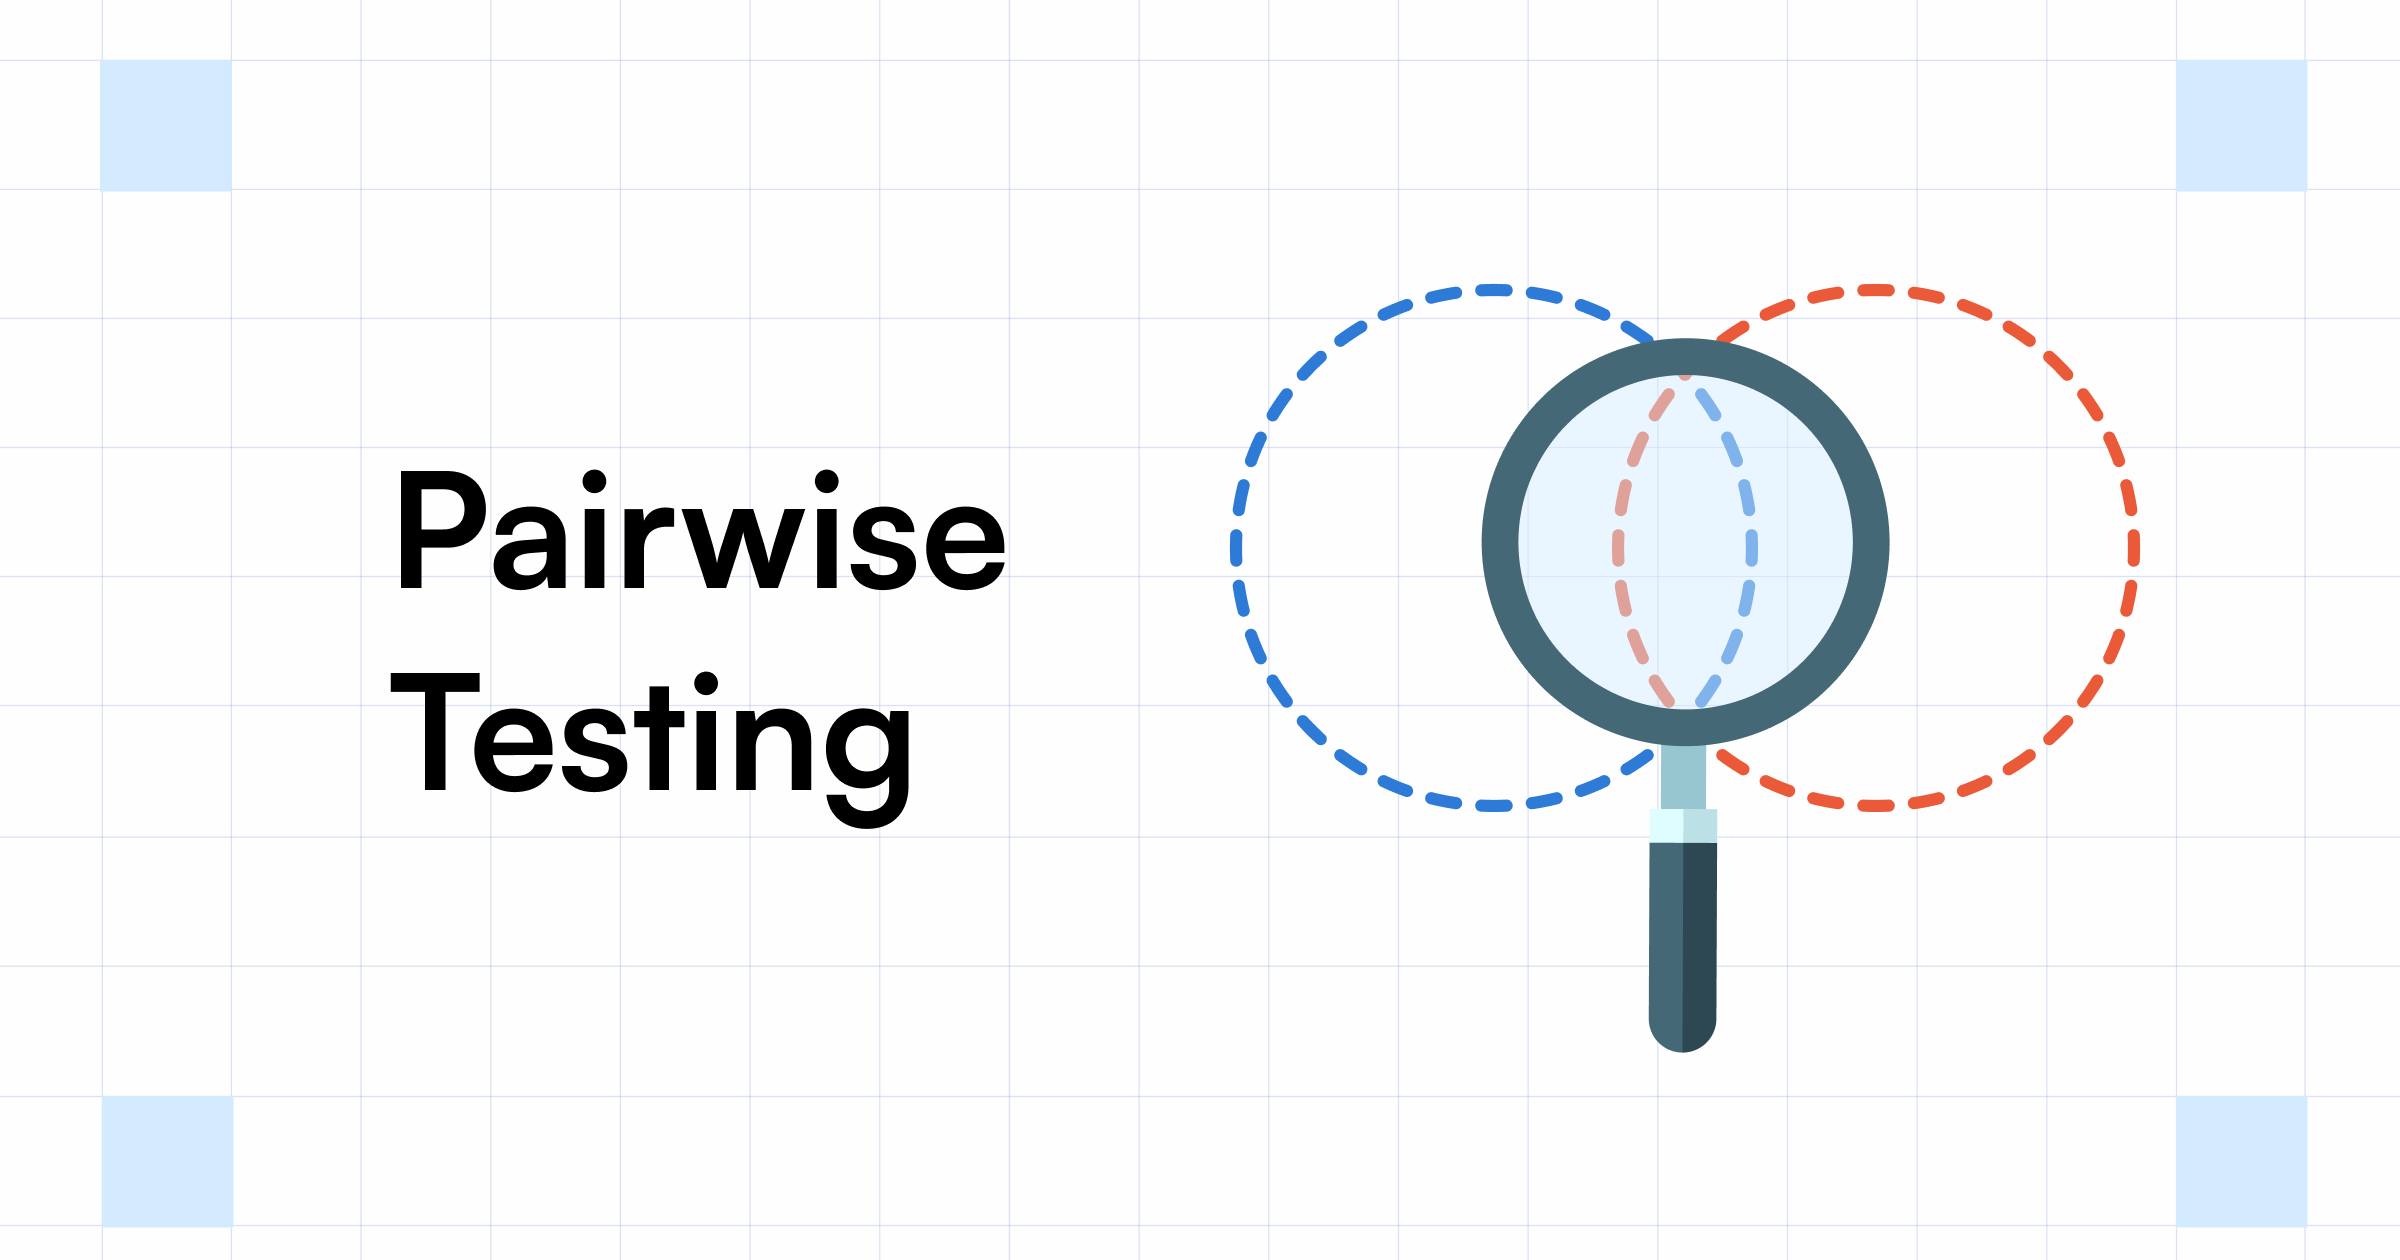 How To Perform Pairwise Testing - A Complete Guide